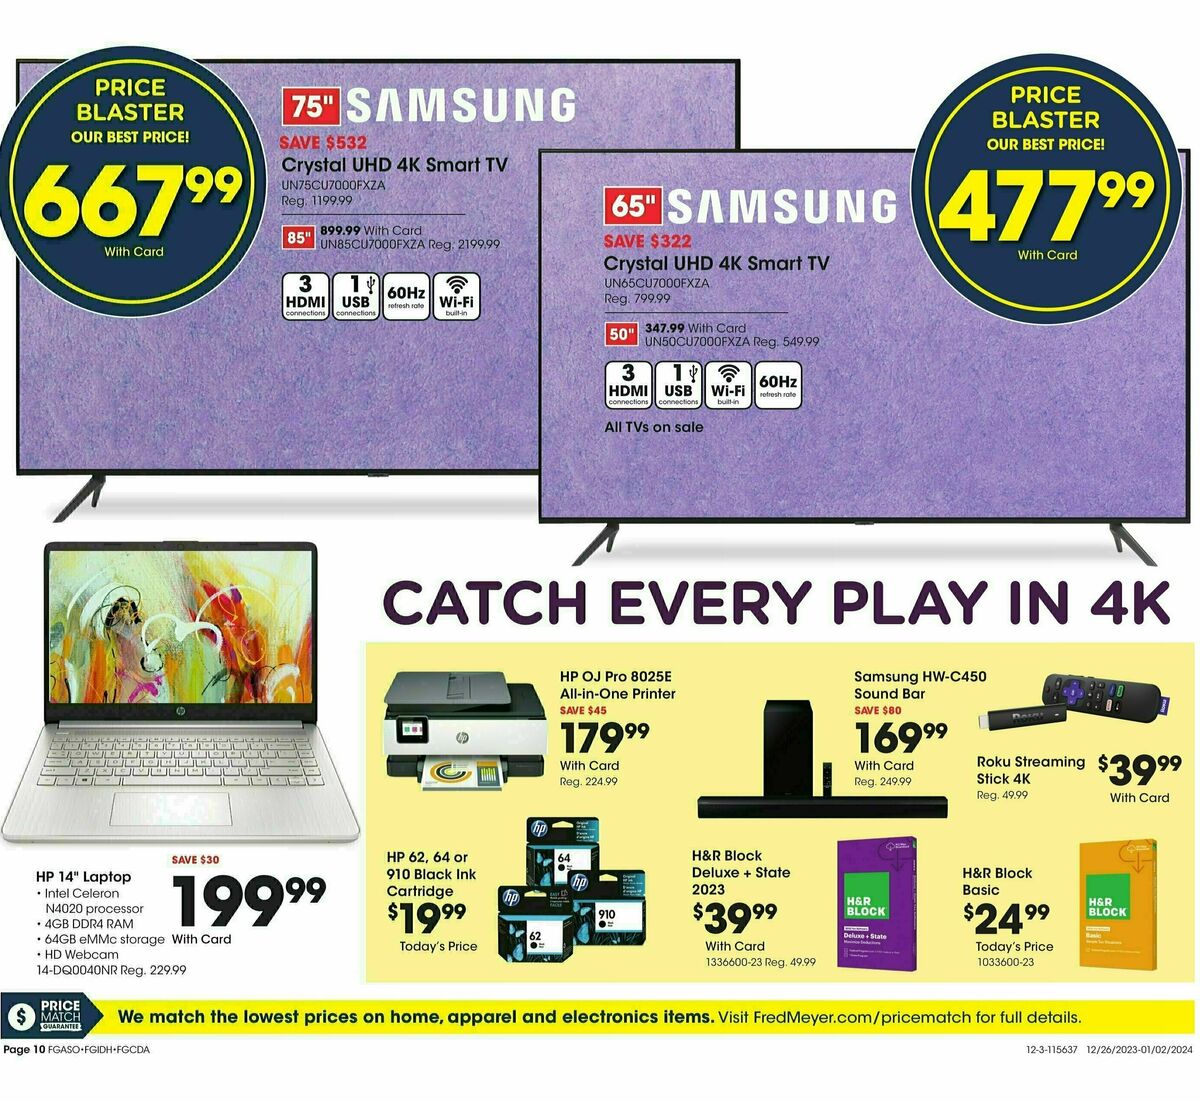 Fred Meyer General Merchandise Weekly Ad from December 27